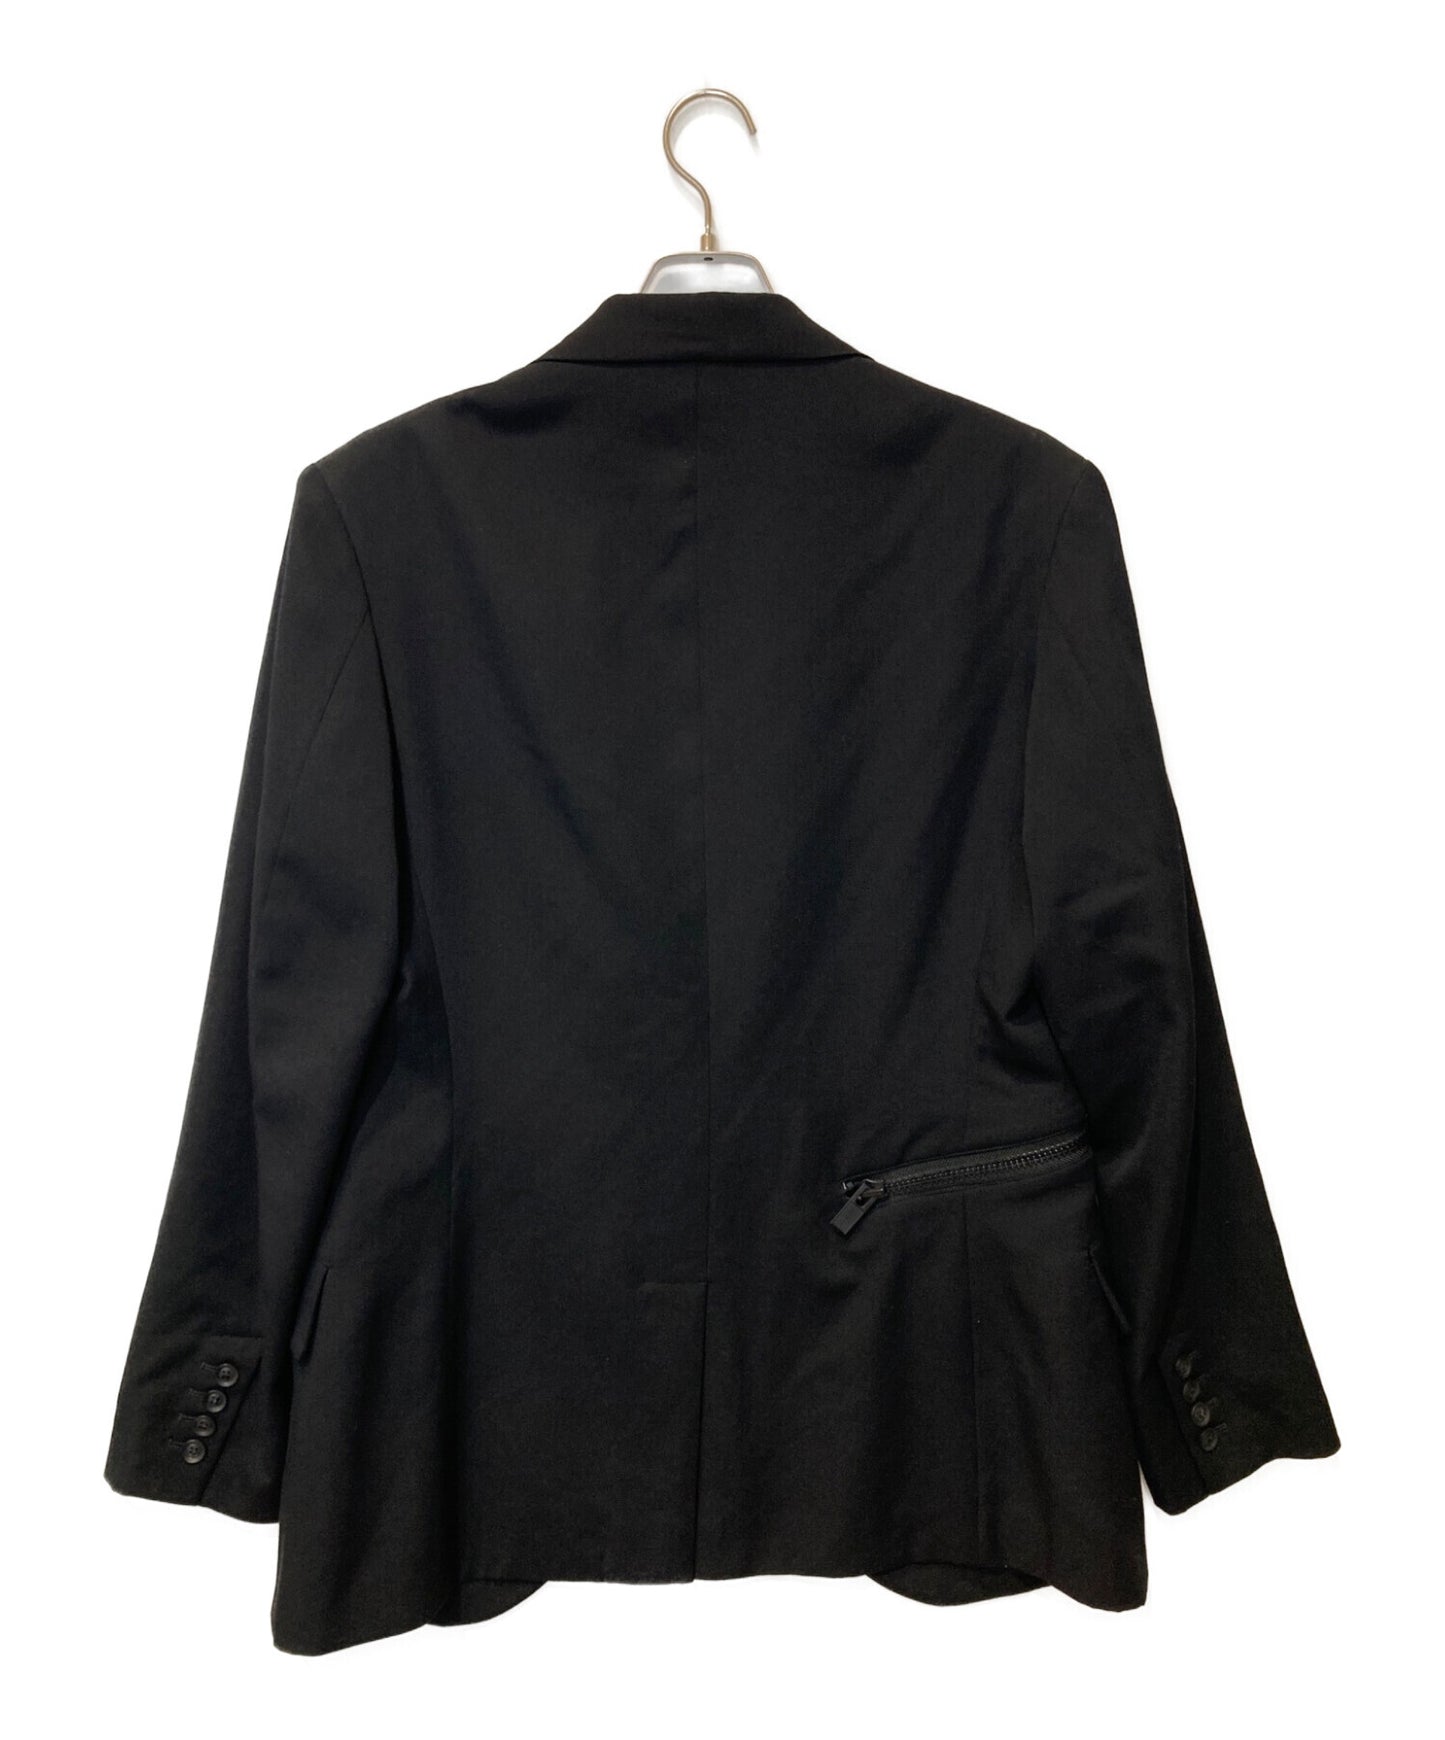 [Pre-owned] Yohji Yamamoto pour homme Jacket with right side zipper HX-J13-100